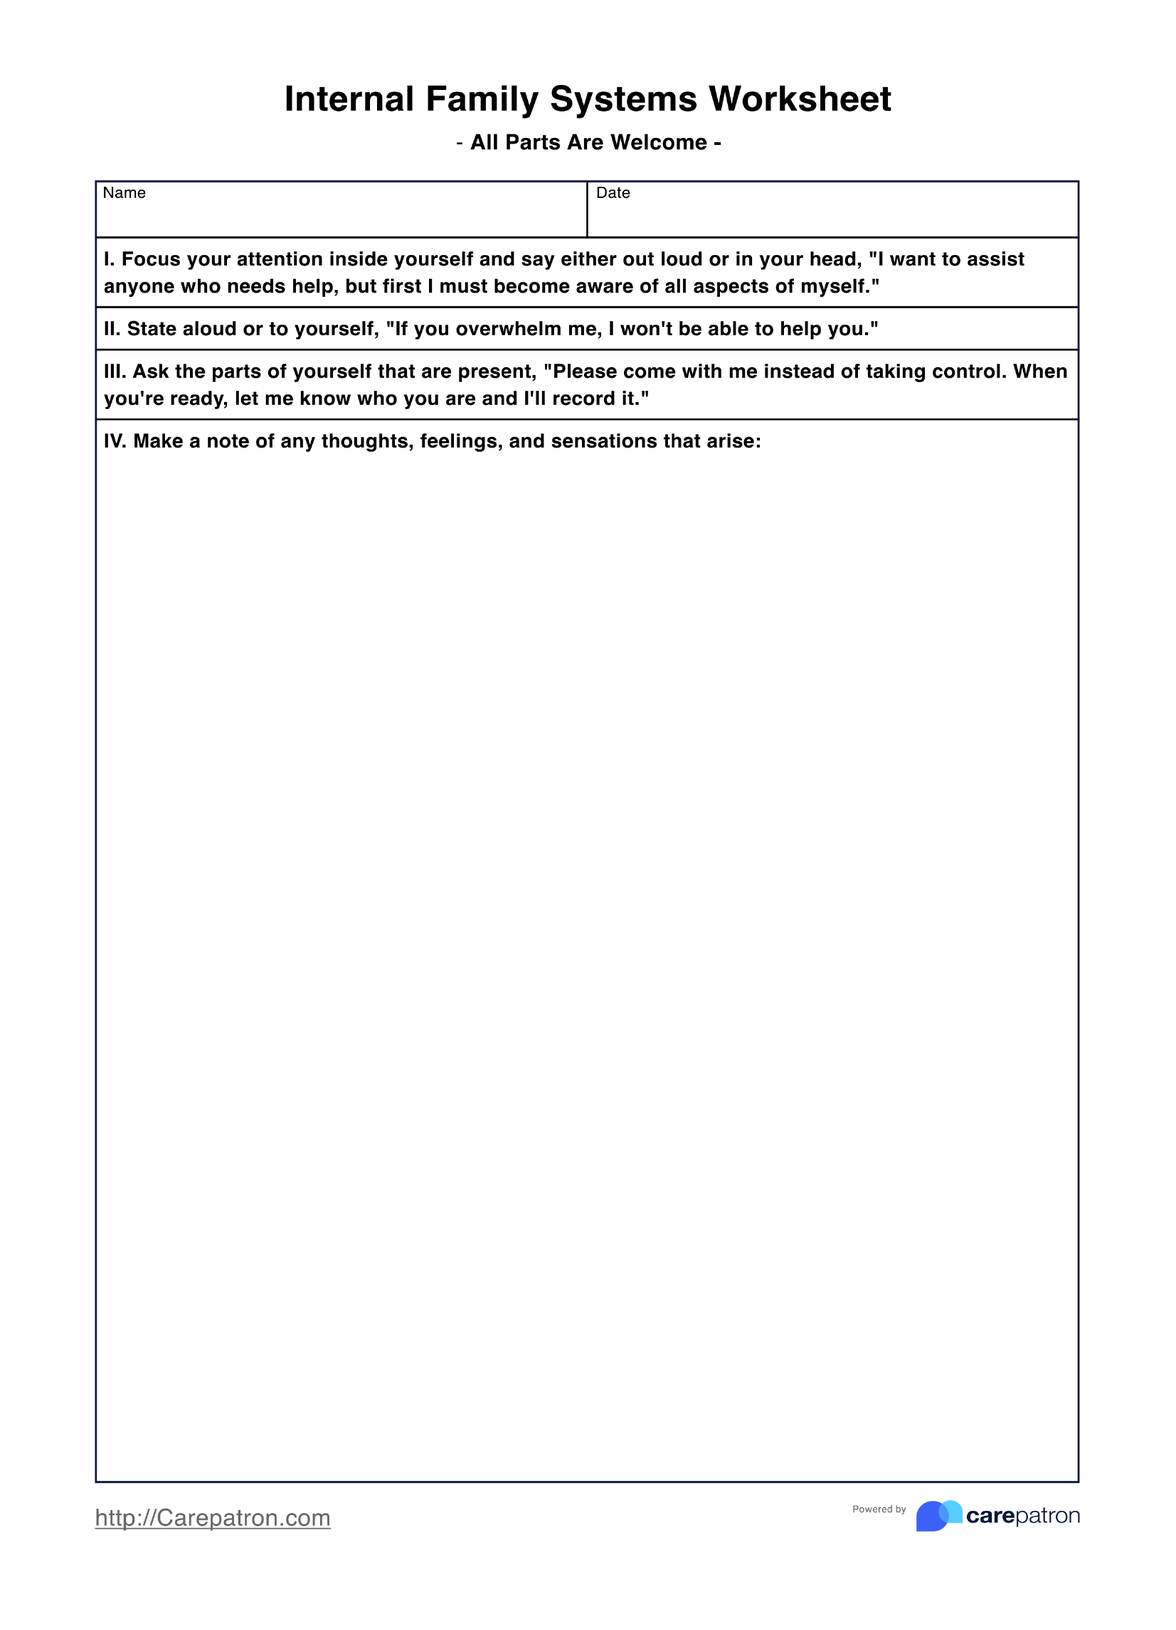 Internal Family Systems Worksheets PDF Example